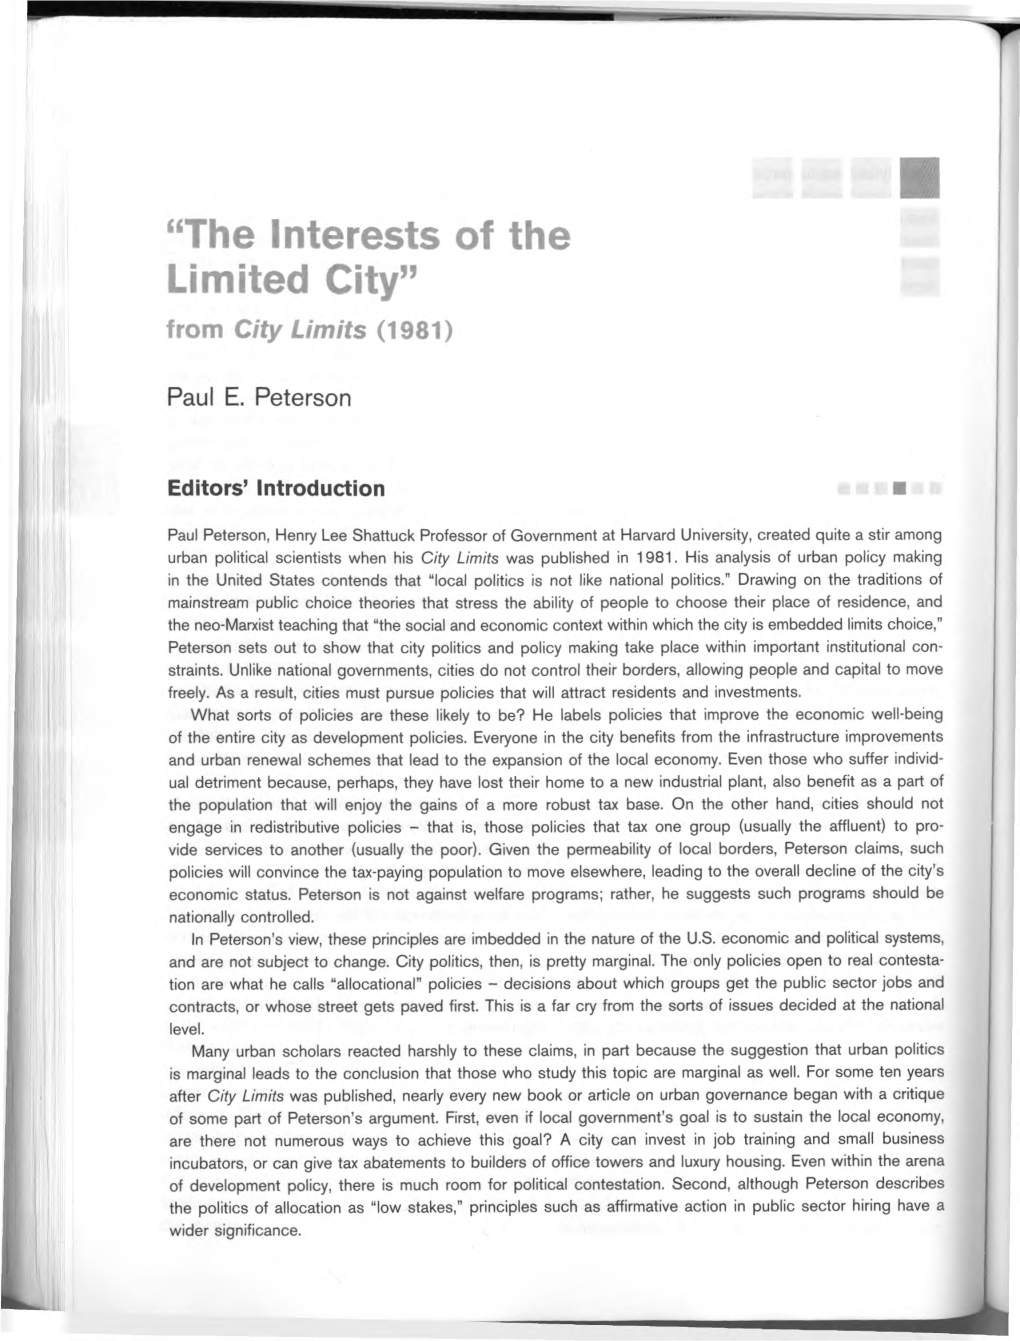 “The Interests of the Limited City” from City Limits (1981)